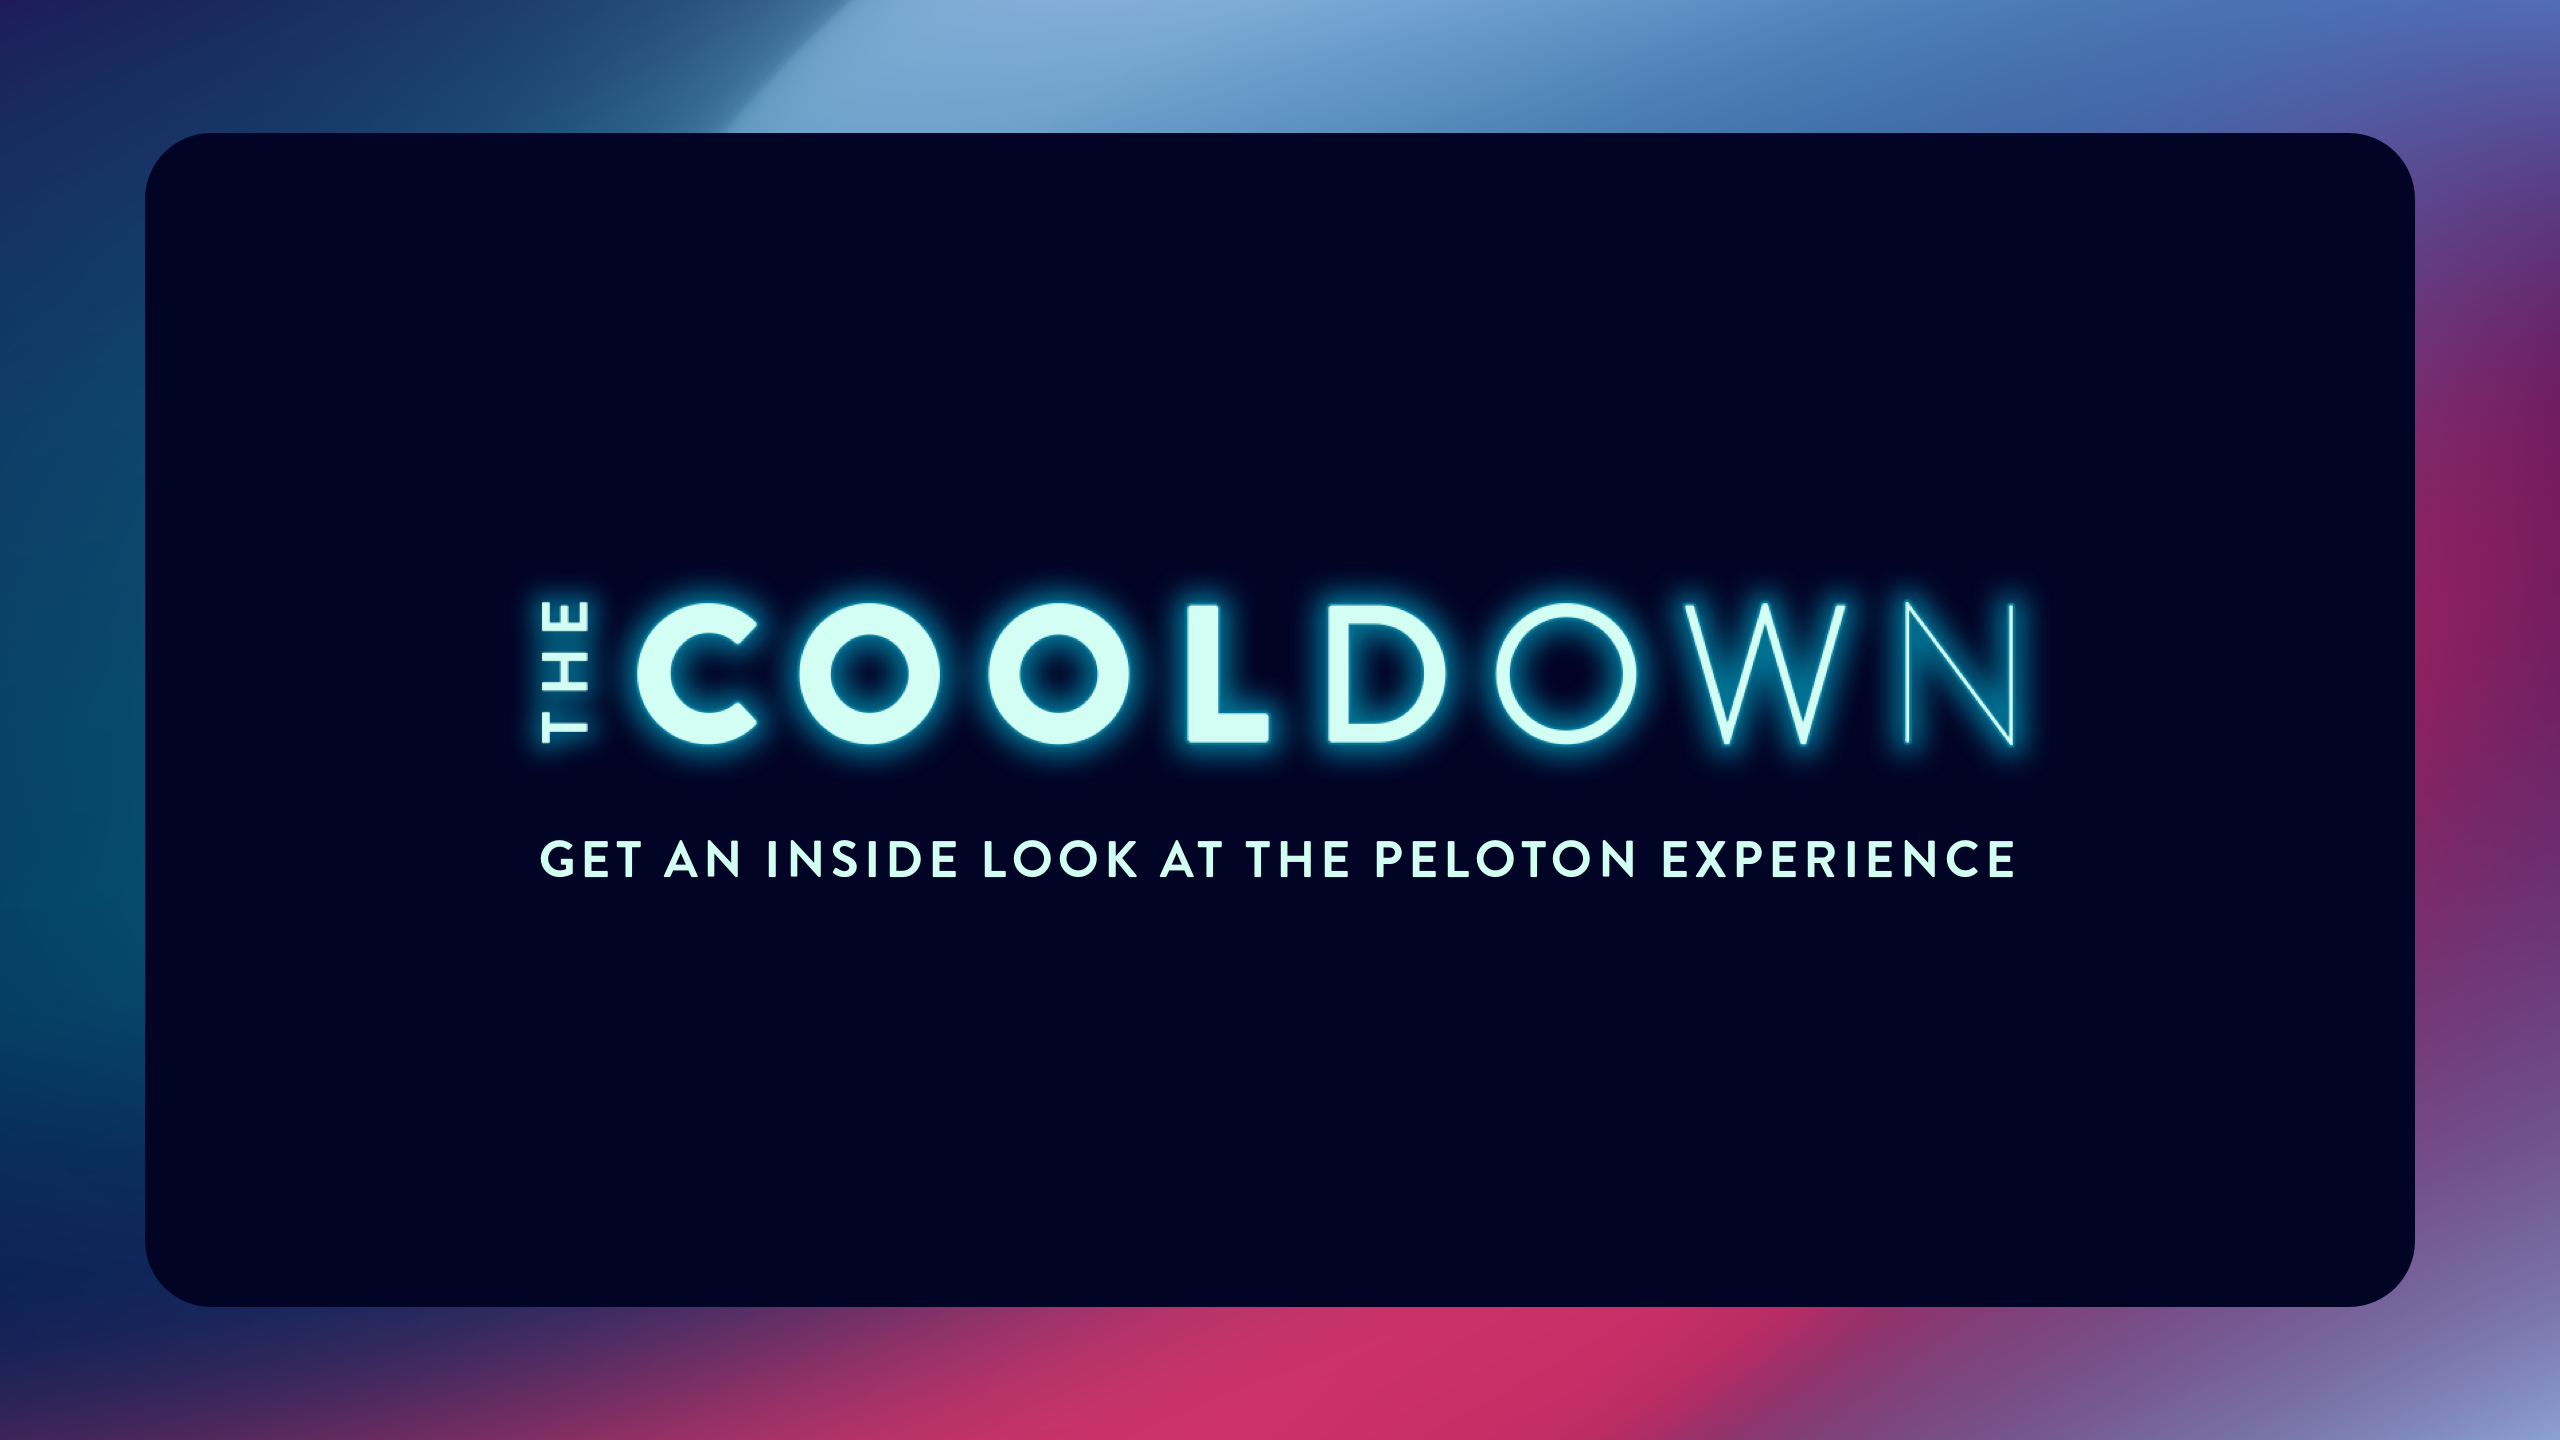 The Cooldown: Get an Inside Look at the Peloton Experience